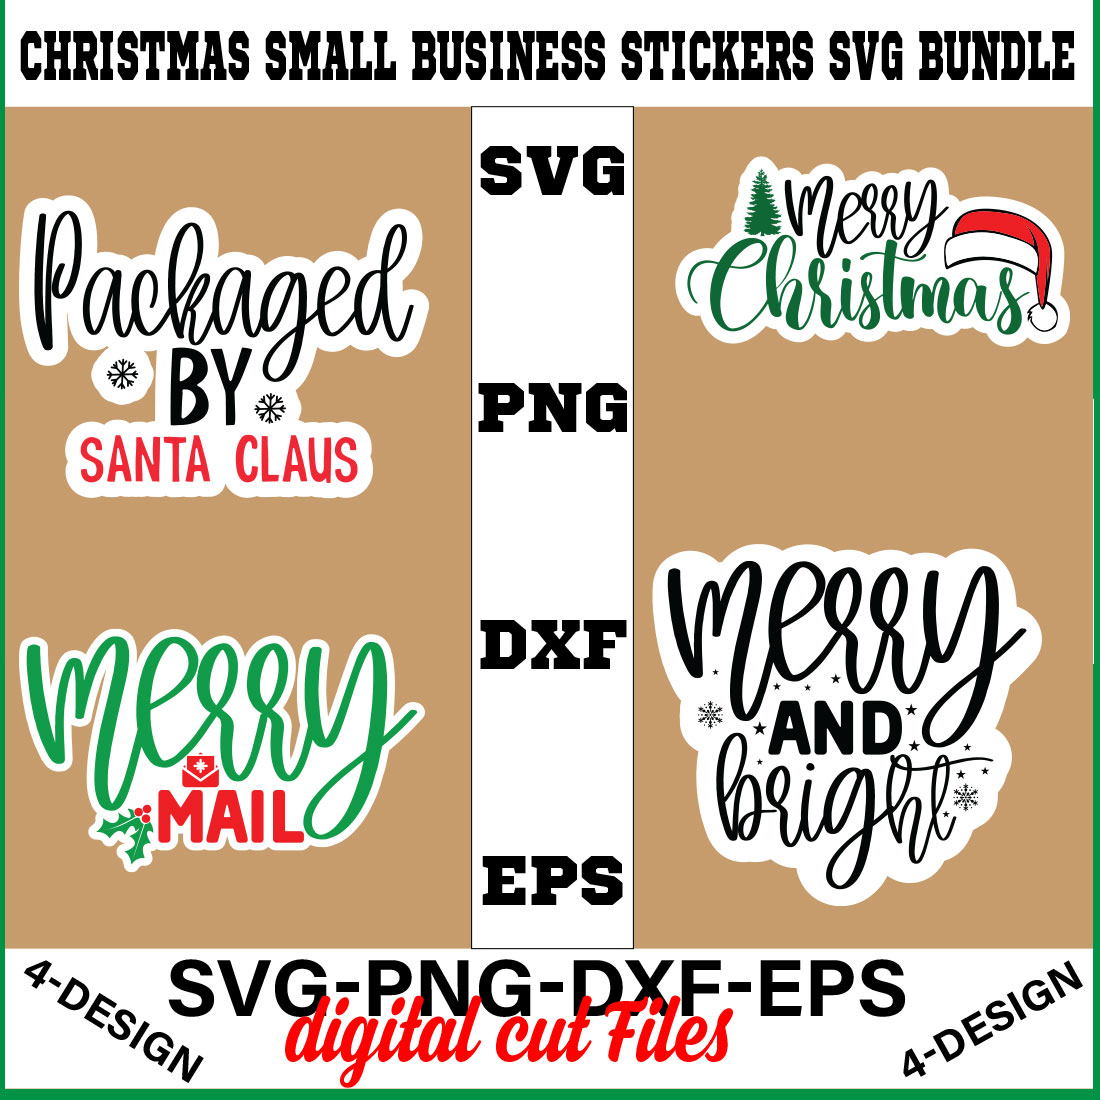 Christmas SVG Bundle Funny Christmas SVG Cut File Cricut Clip art Commercial Use Holiday SVG Christmas Sayings Quotes Winter Volume-13 cover image.